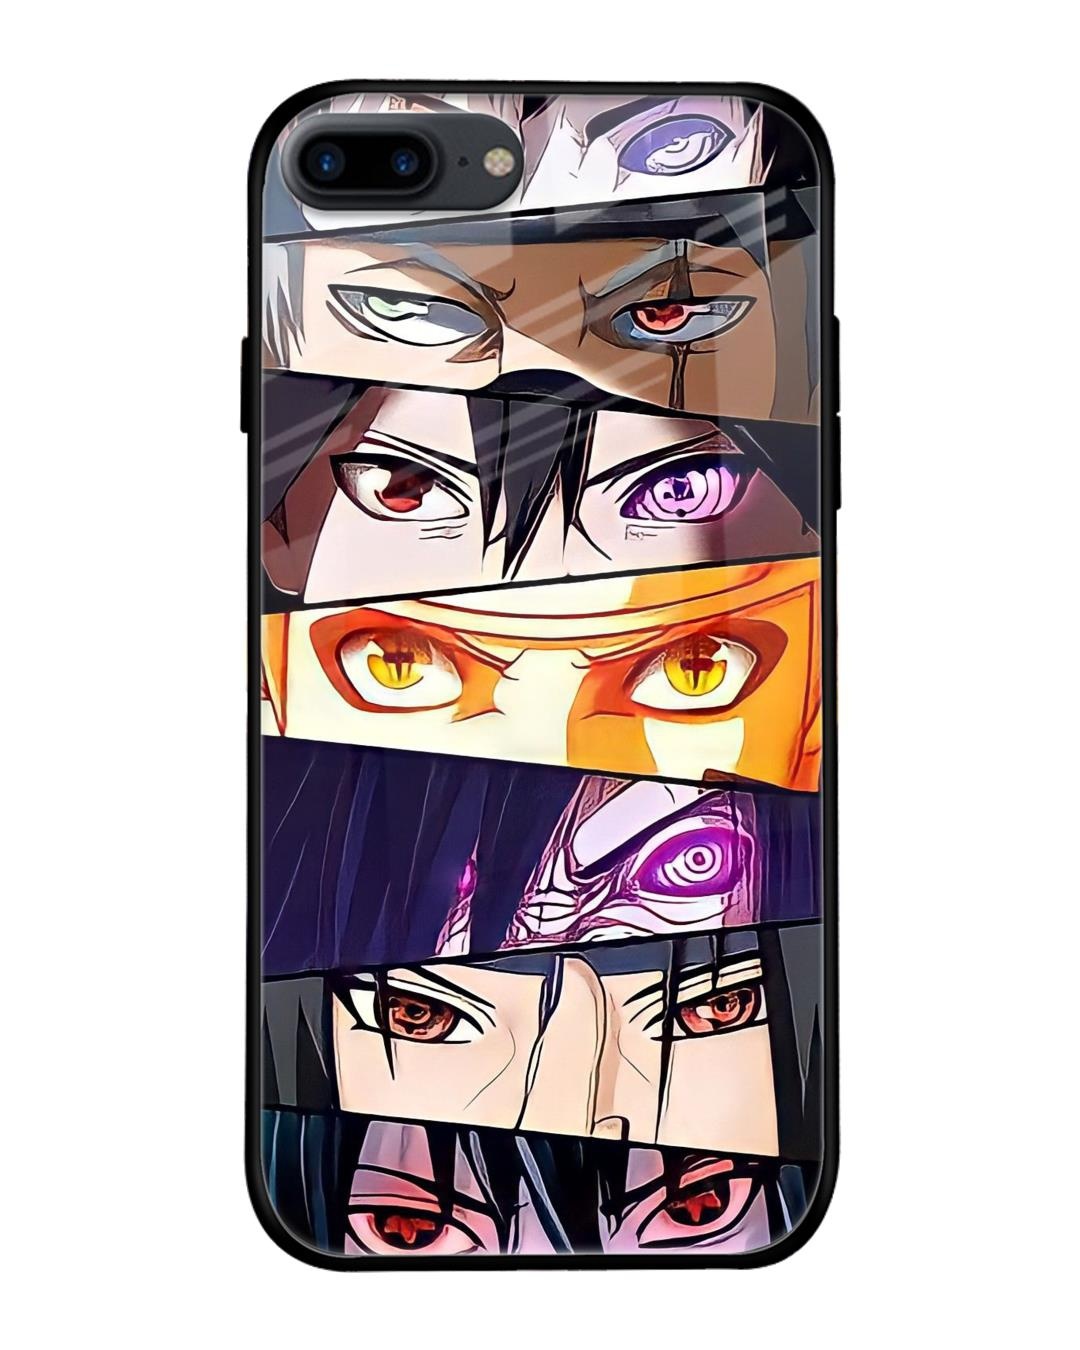 Buy Cartton Anime Apple Iphone 7 Plus Mobile Cover at Rs 99 Only  Zapvi